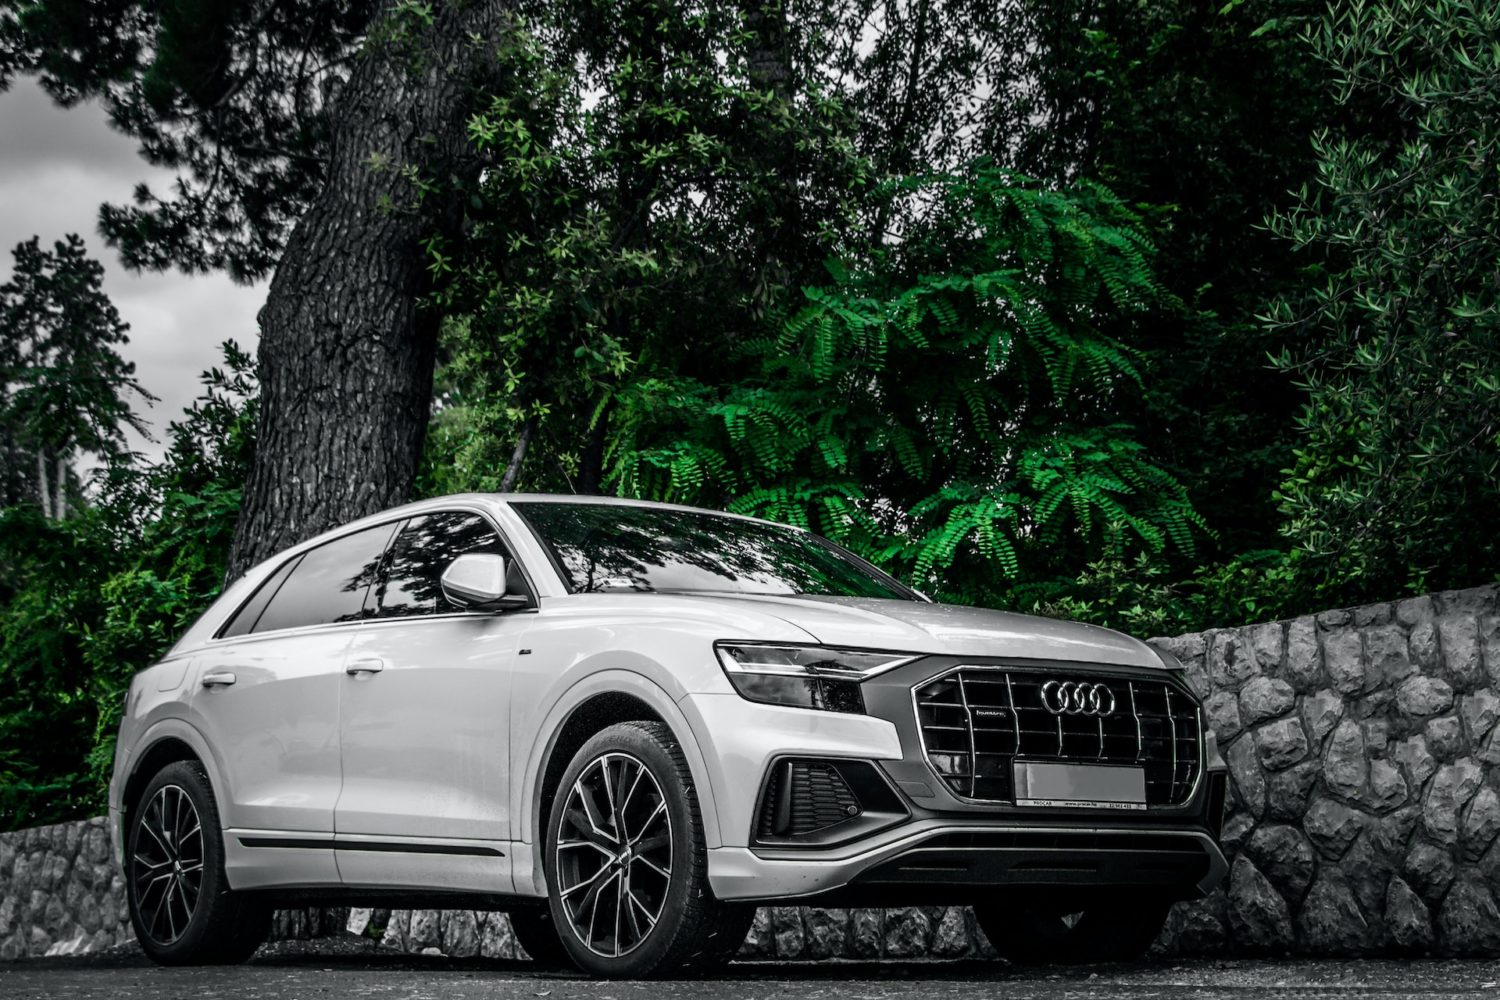 How to Reset Audi Q8/SQ8 Tire Pressure Light LEARN ABOUT TPMS